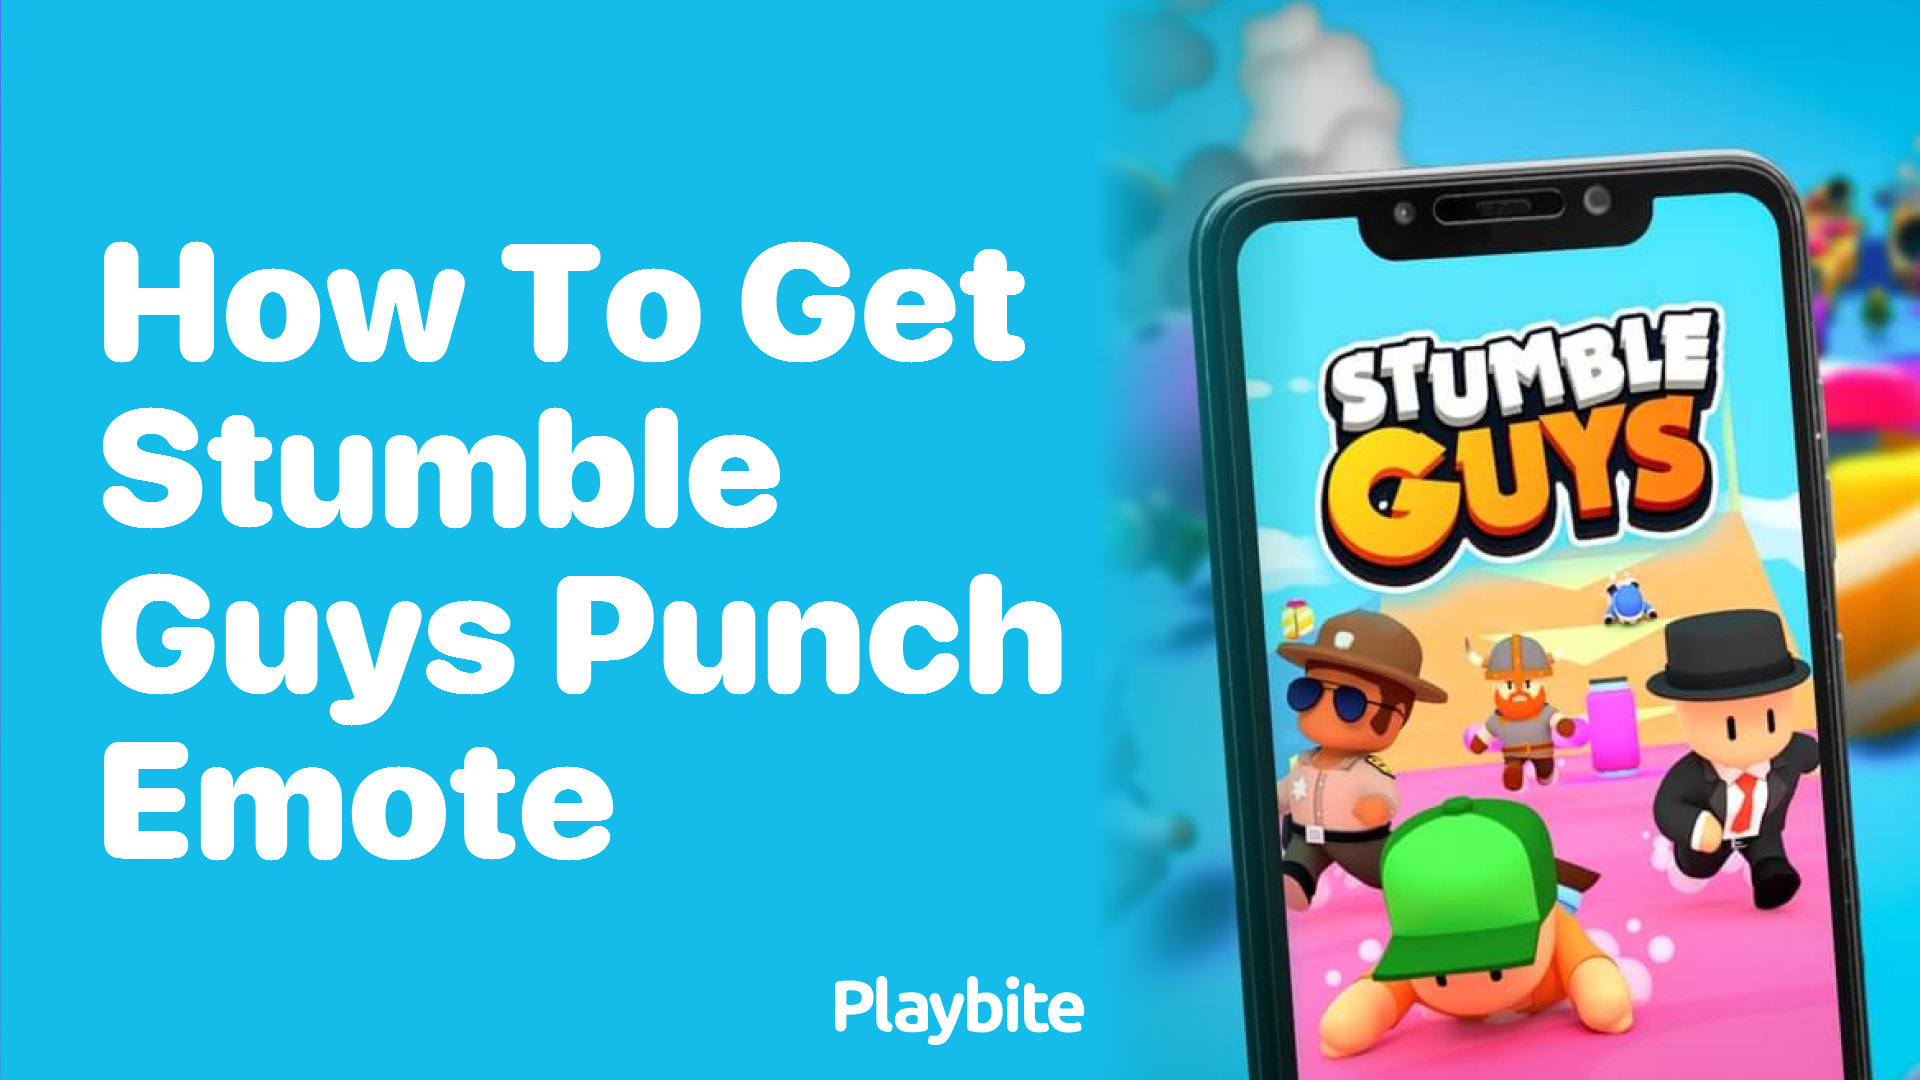 How to Get the Stumble Guys Punch Emote